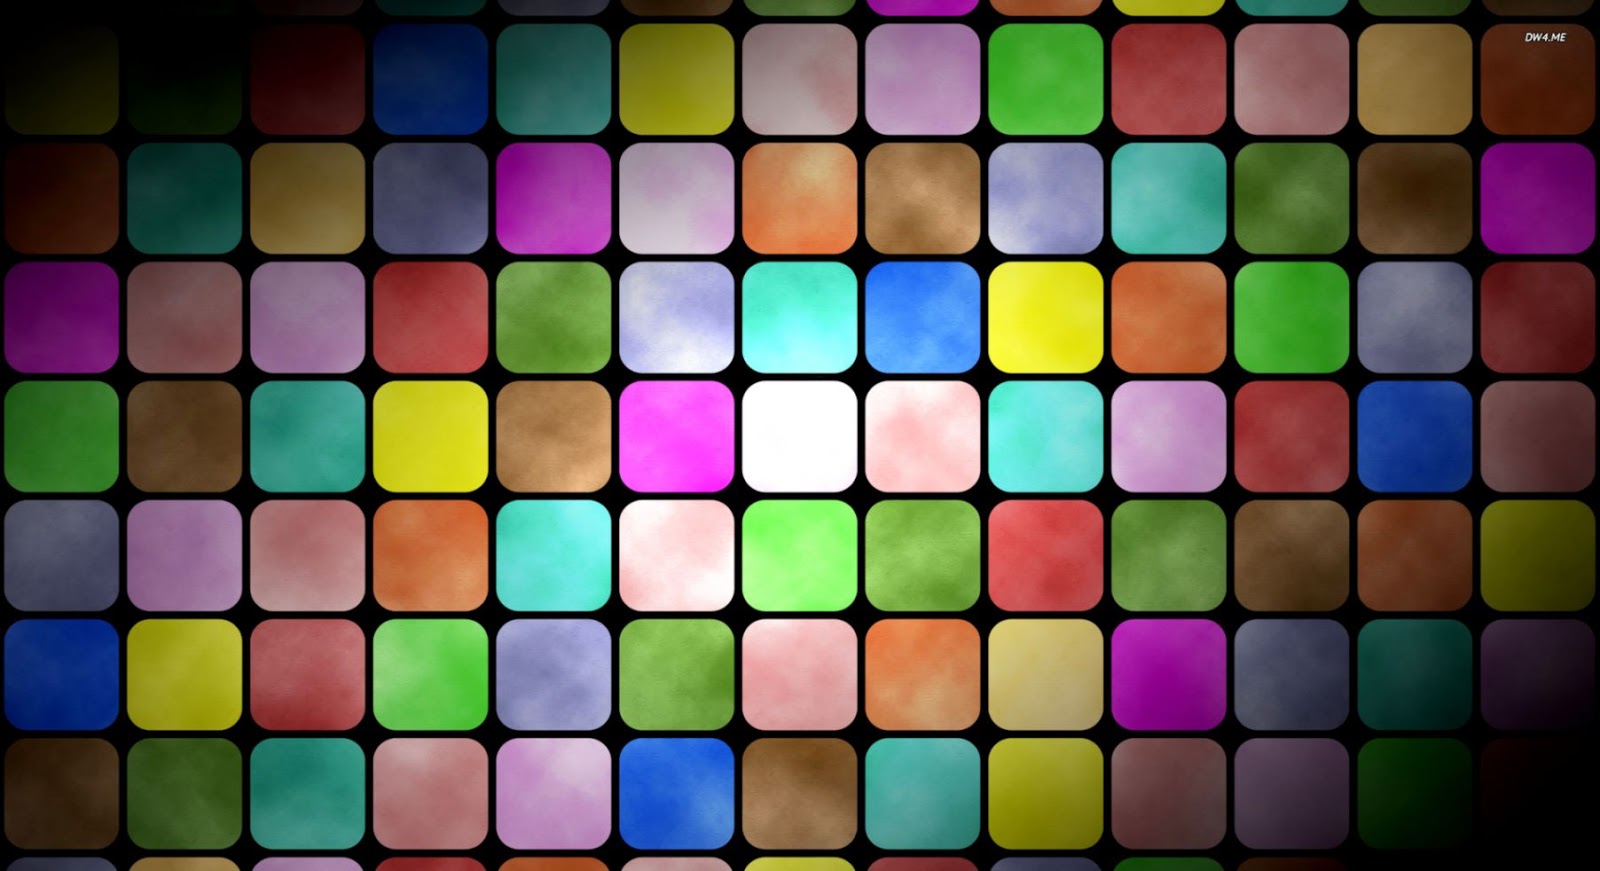 Colorful Rounded Squares Wallpaper Abstract Wallpapers - Desktop Wallpaper Squares - HD Wallpaper 